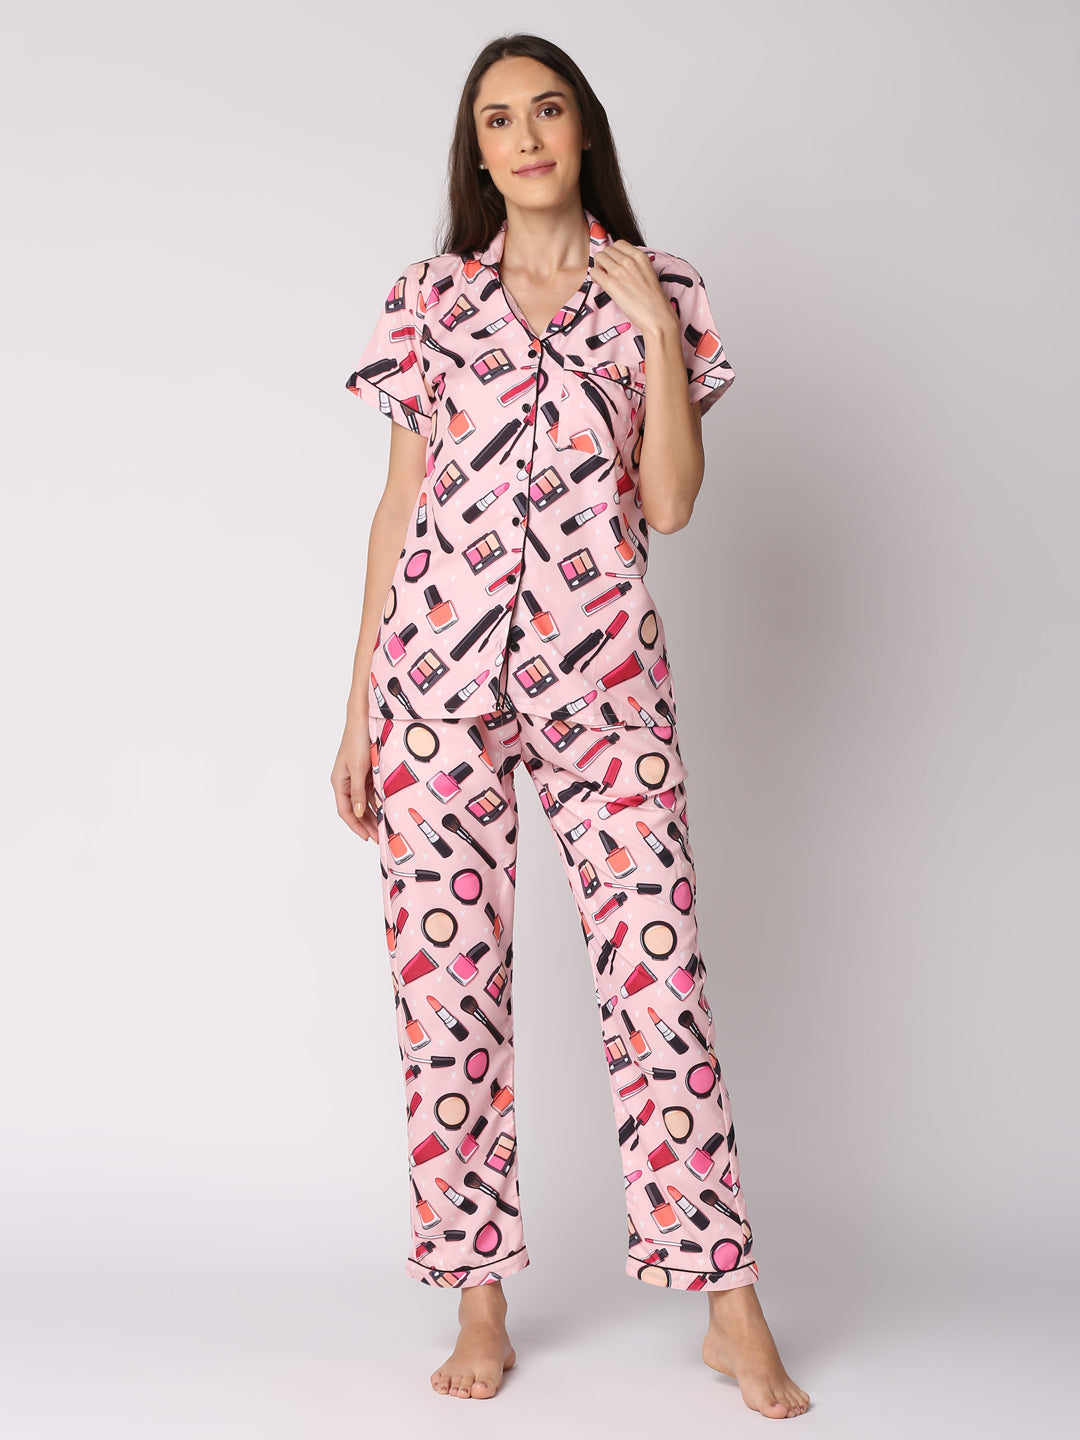 Makeup Forever Button Down Pj Set - Cotton Rayon Pj Set with Notched Collar